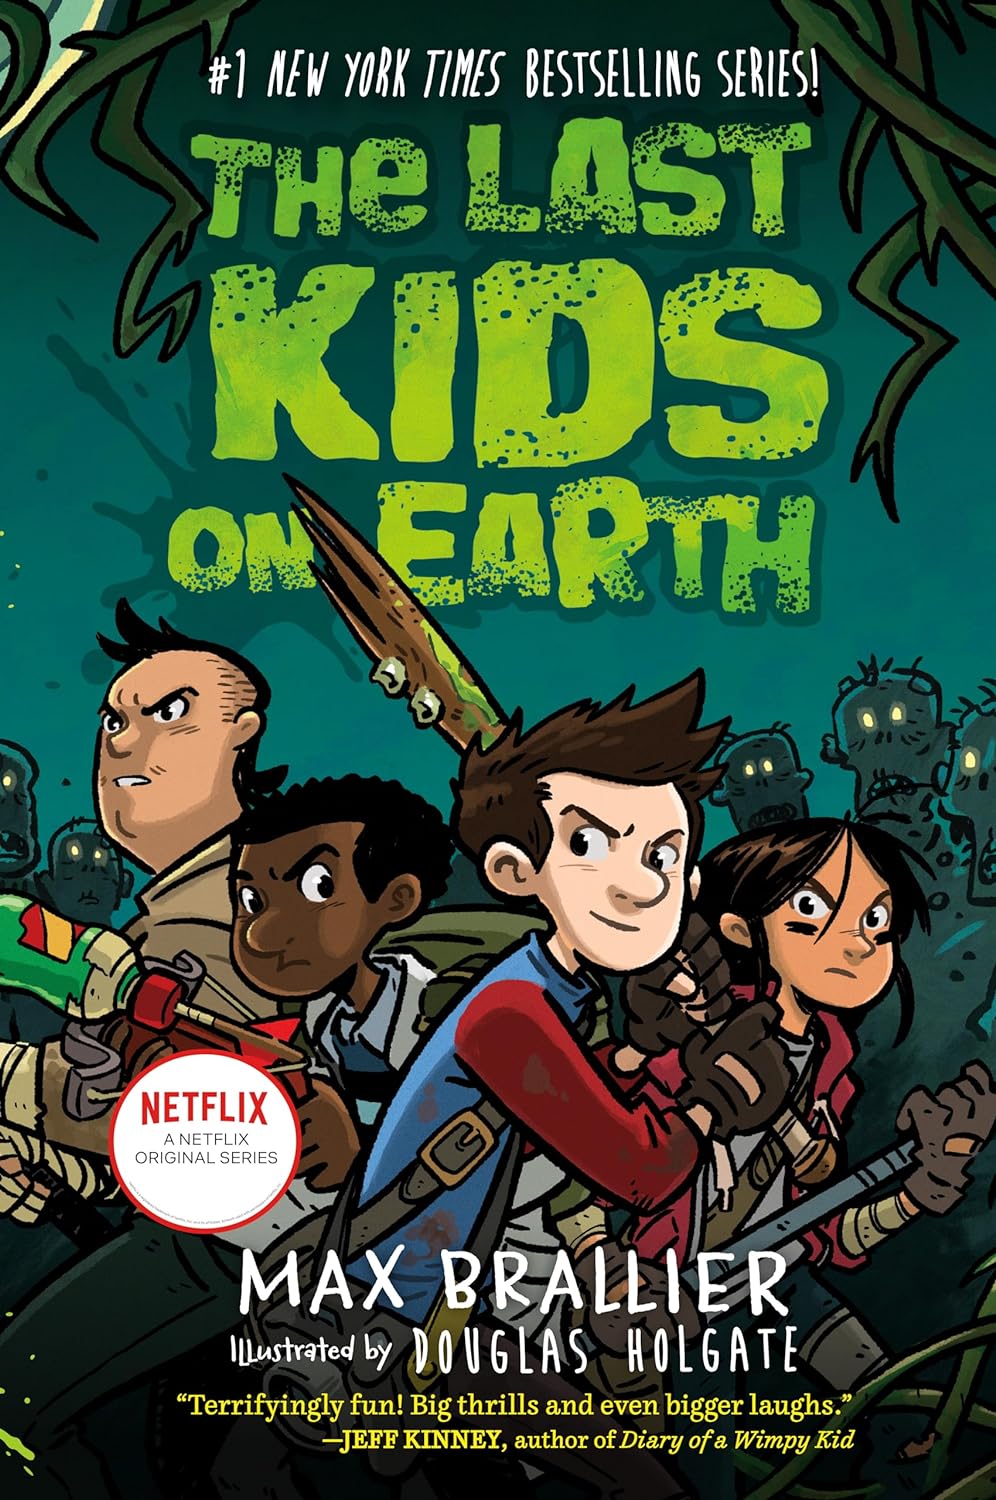 Image for "The Last Kids on Earth"